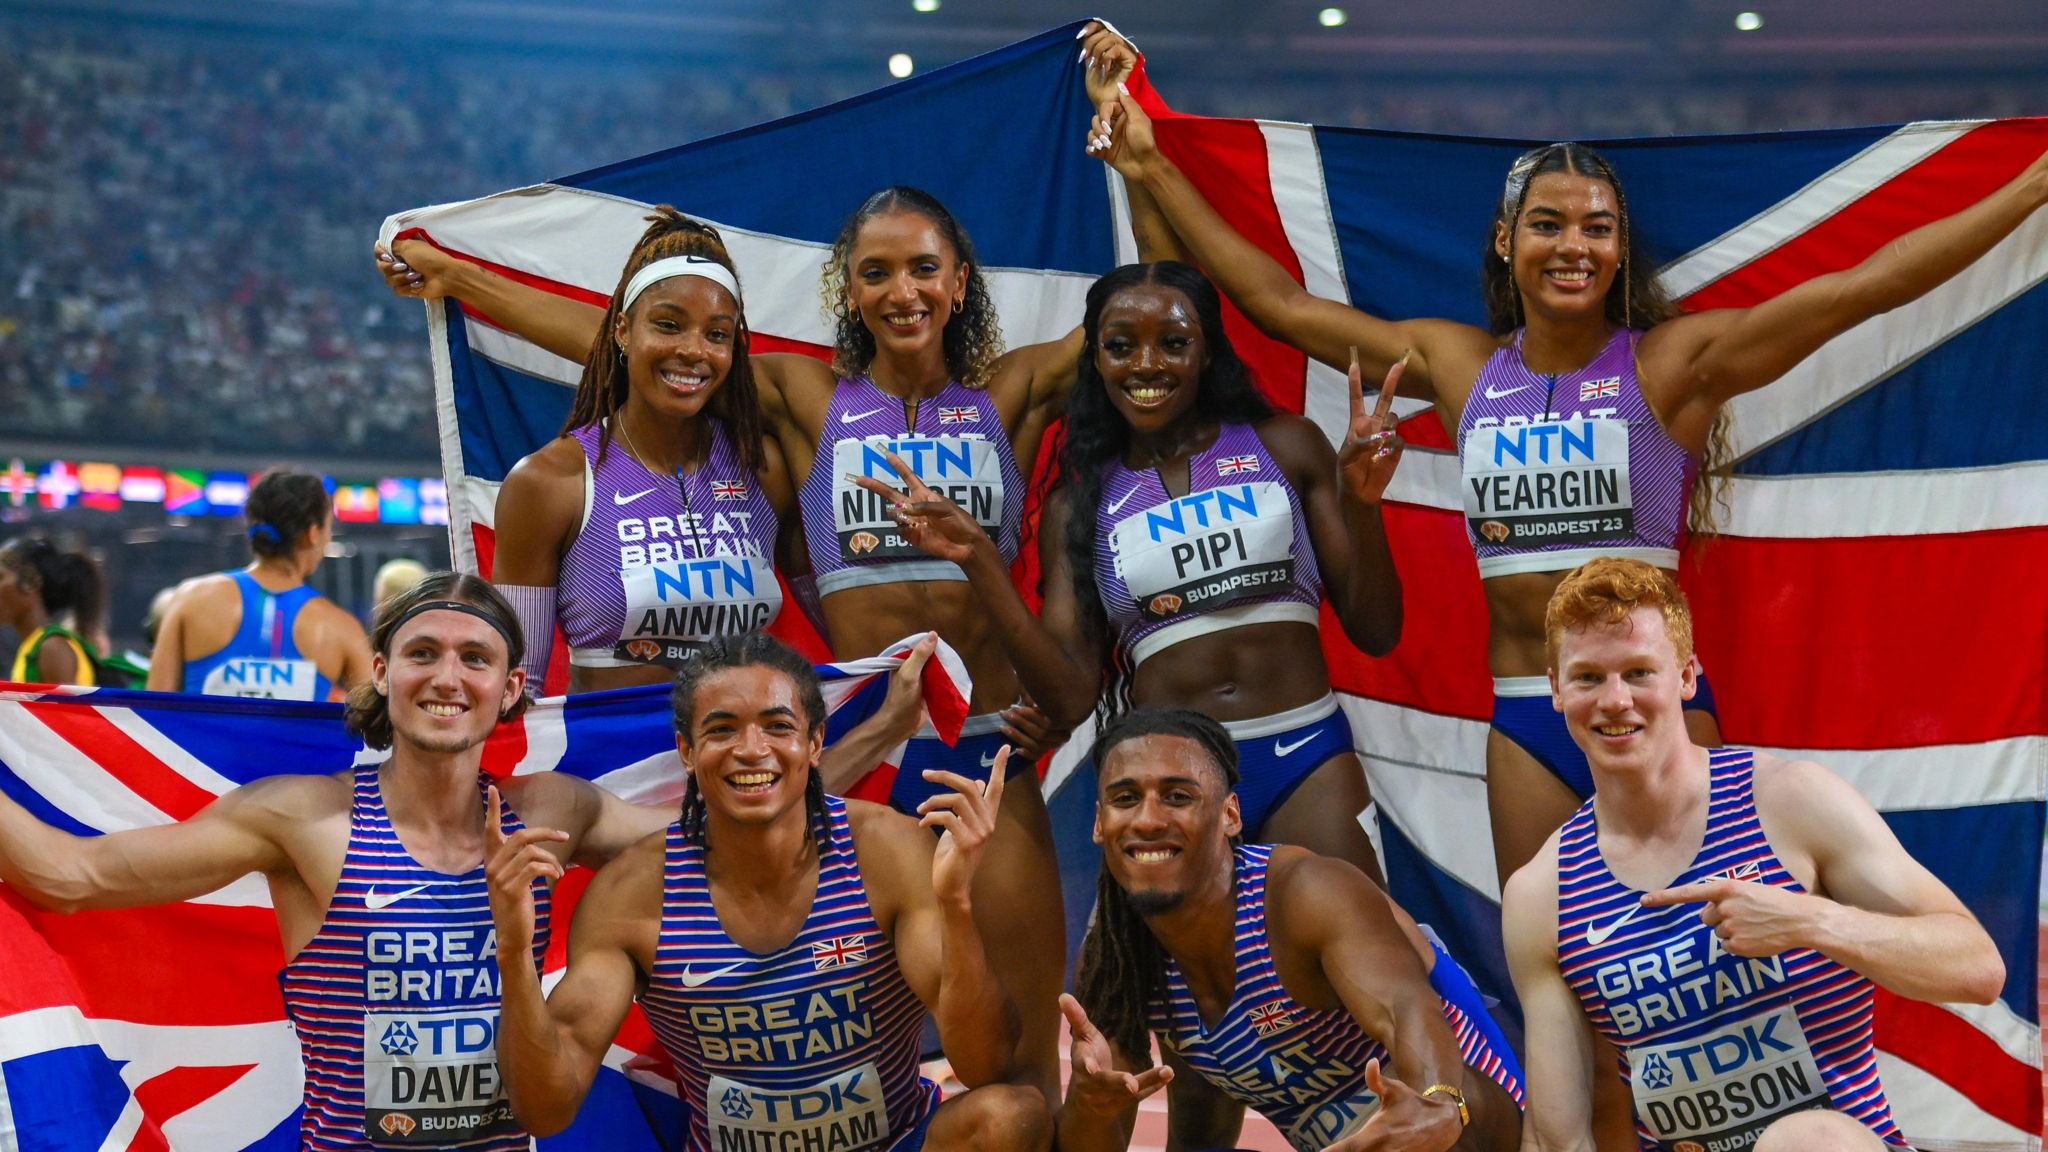 Four men are crouched down smiling at the camera with four women stood directly behind them also smiling at the camera. They are all dressed in red, white and blue running vests holding union jack flags